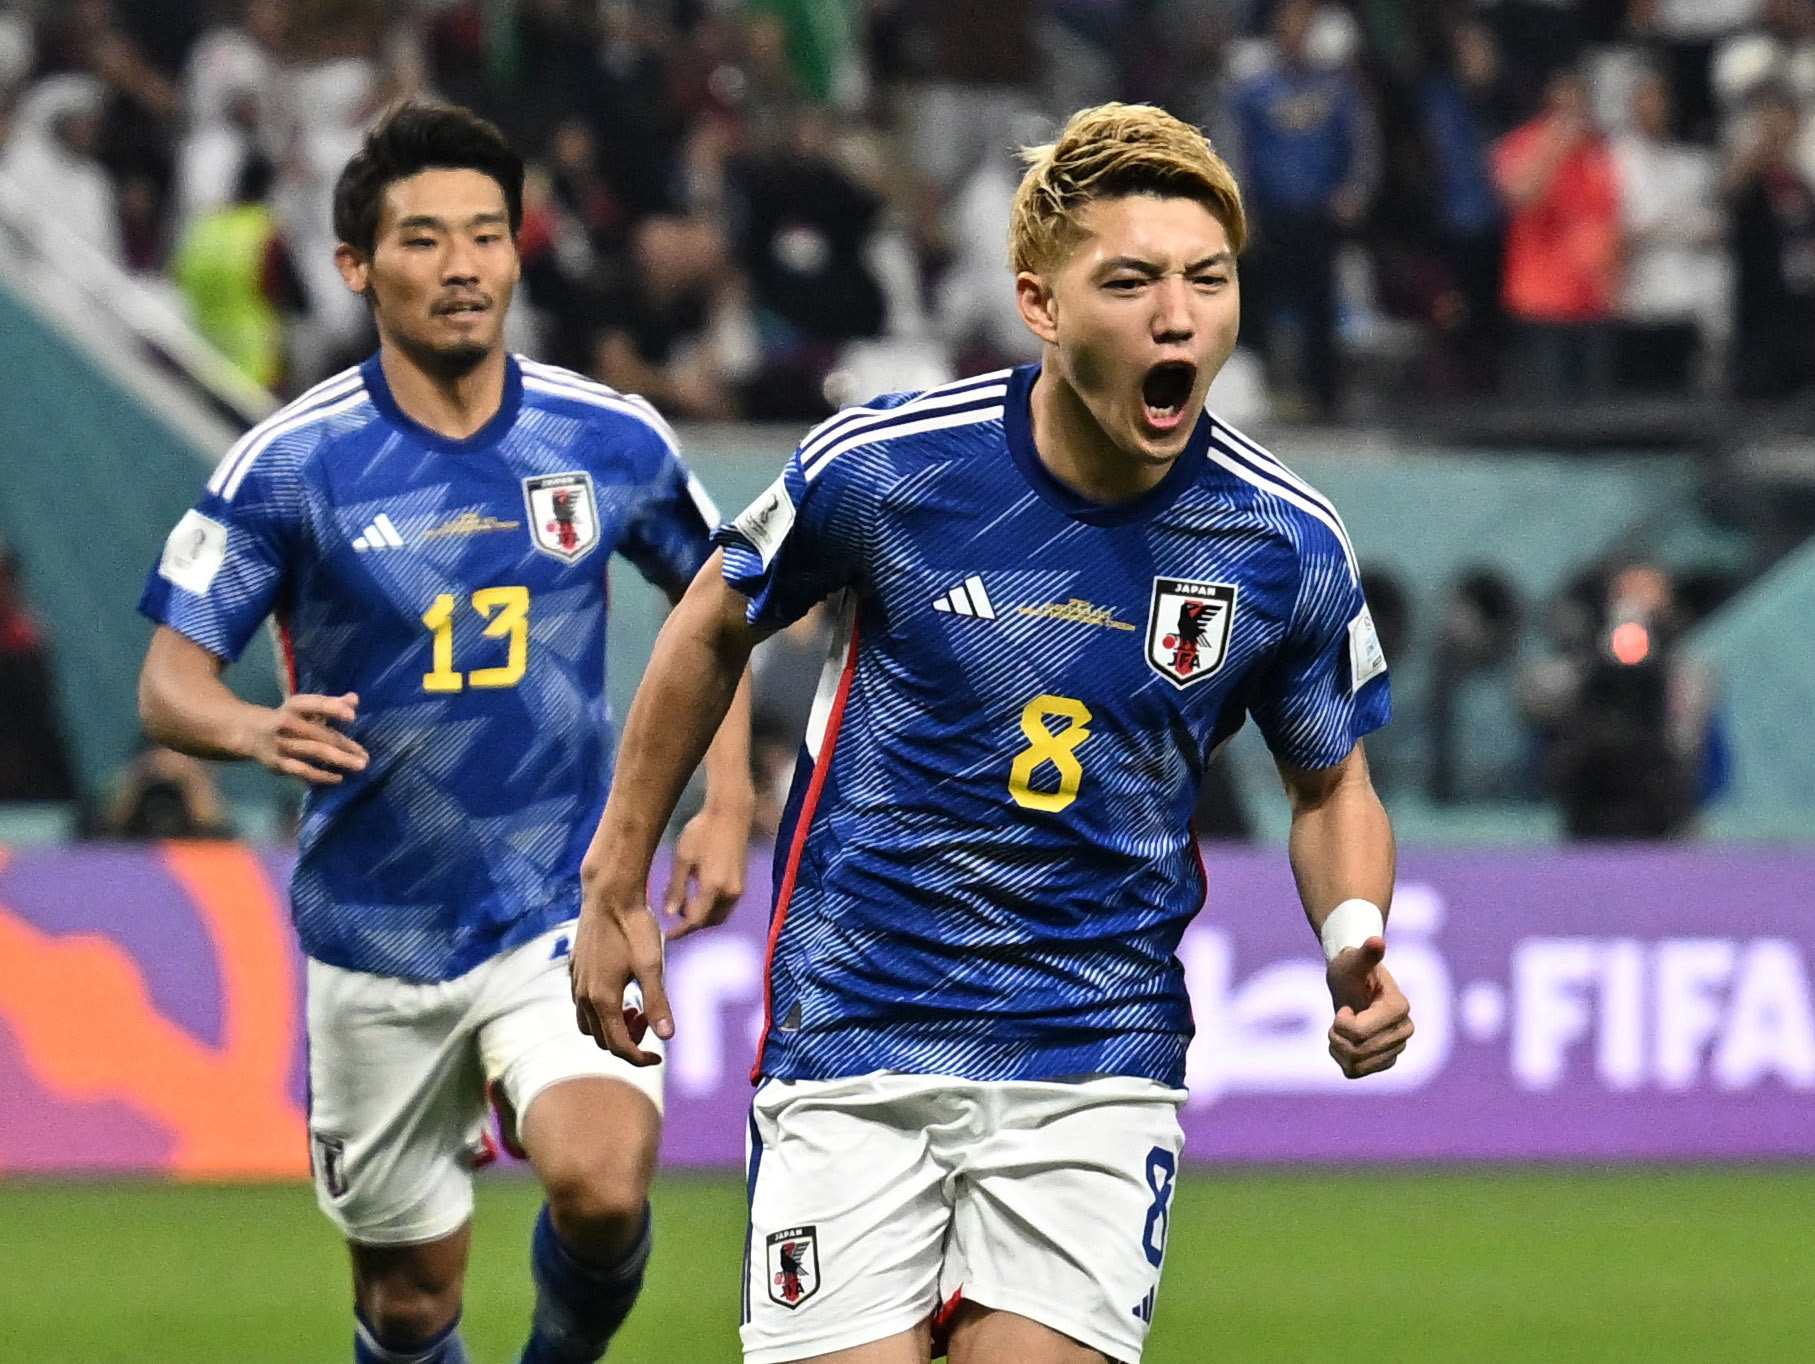 Japan vs Spain live updates: Tanaka goal, score and stats, 2-1 | World Cup 2022